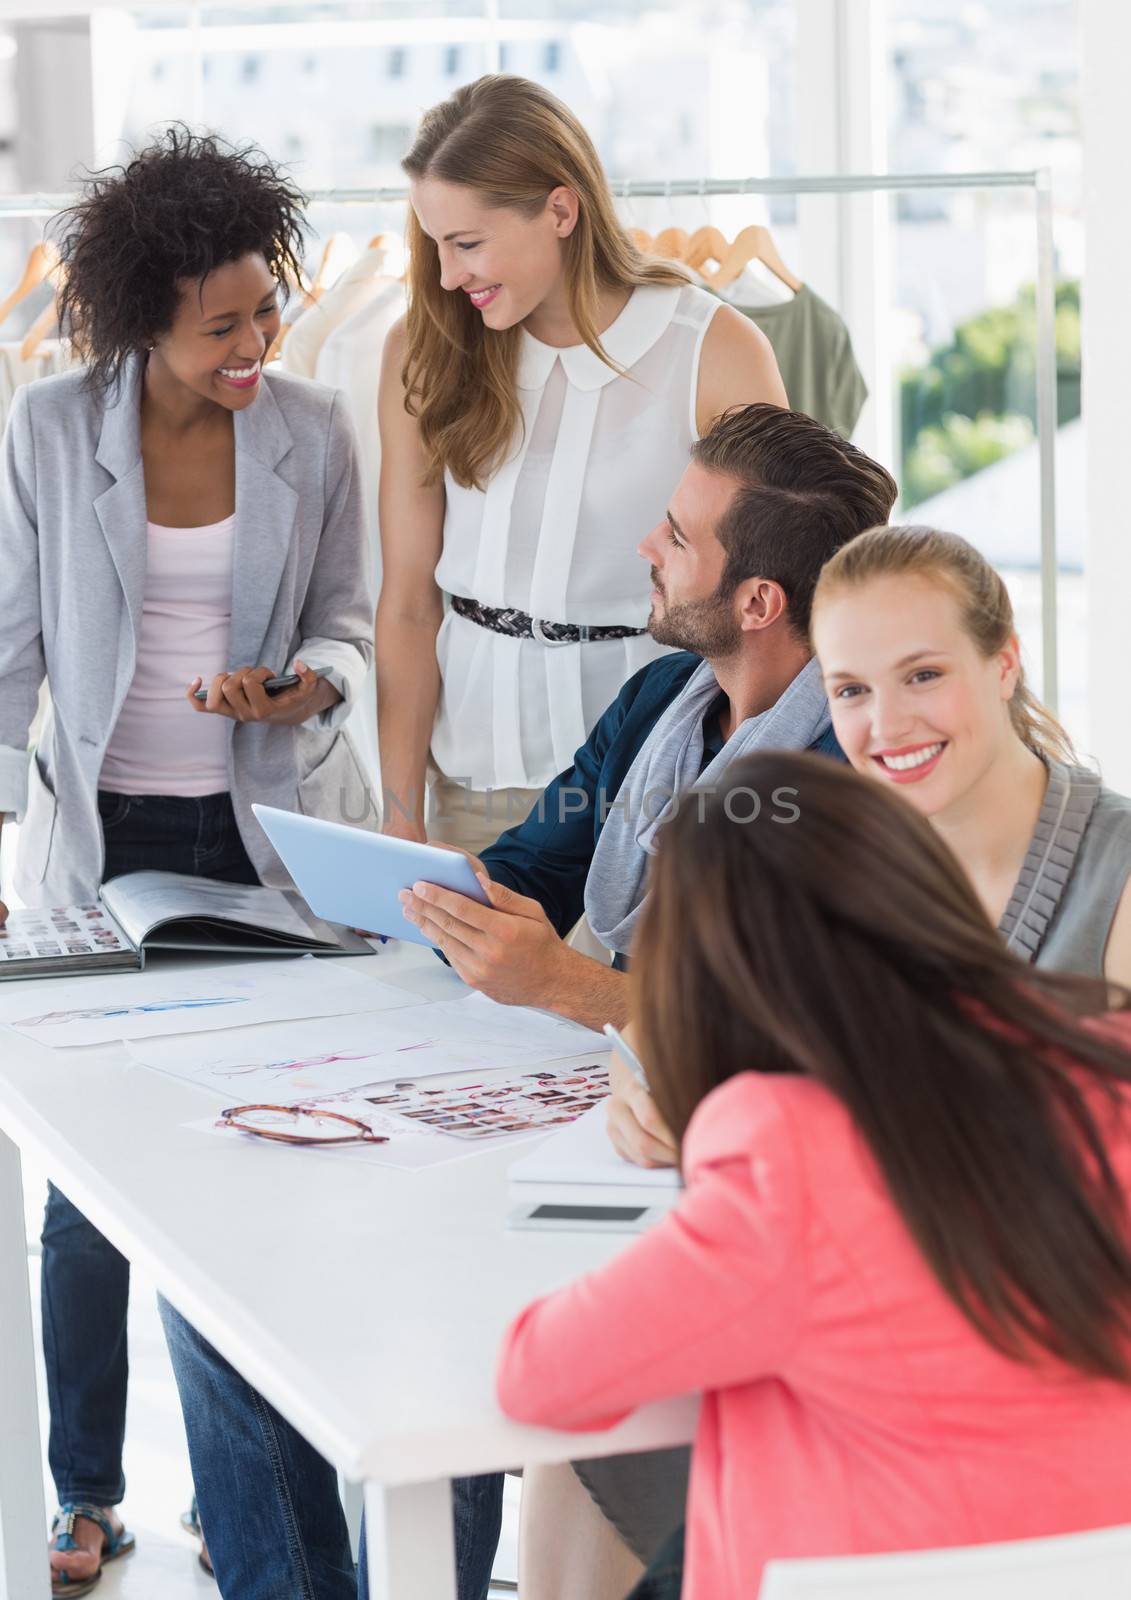 Group of fashion designers discussing designs in a studio